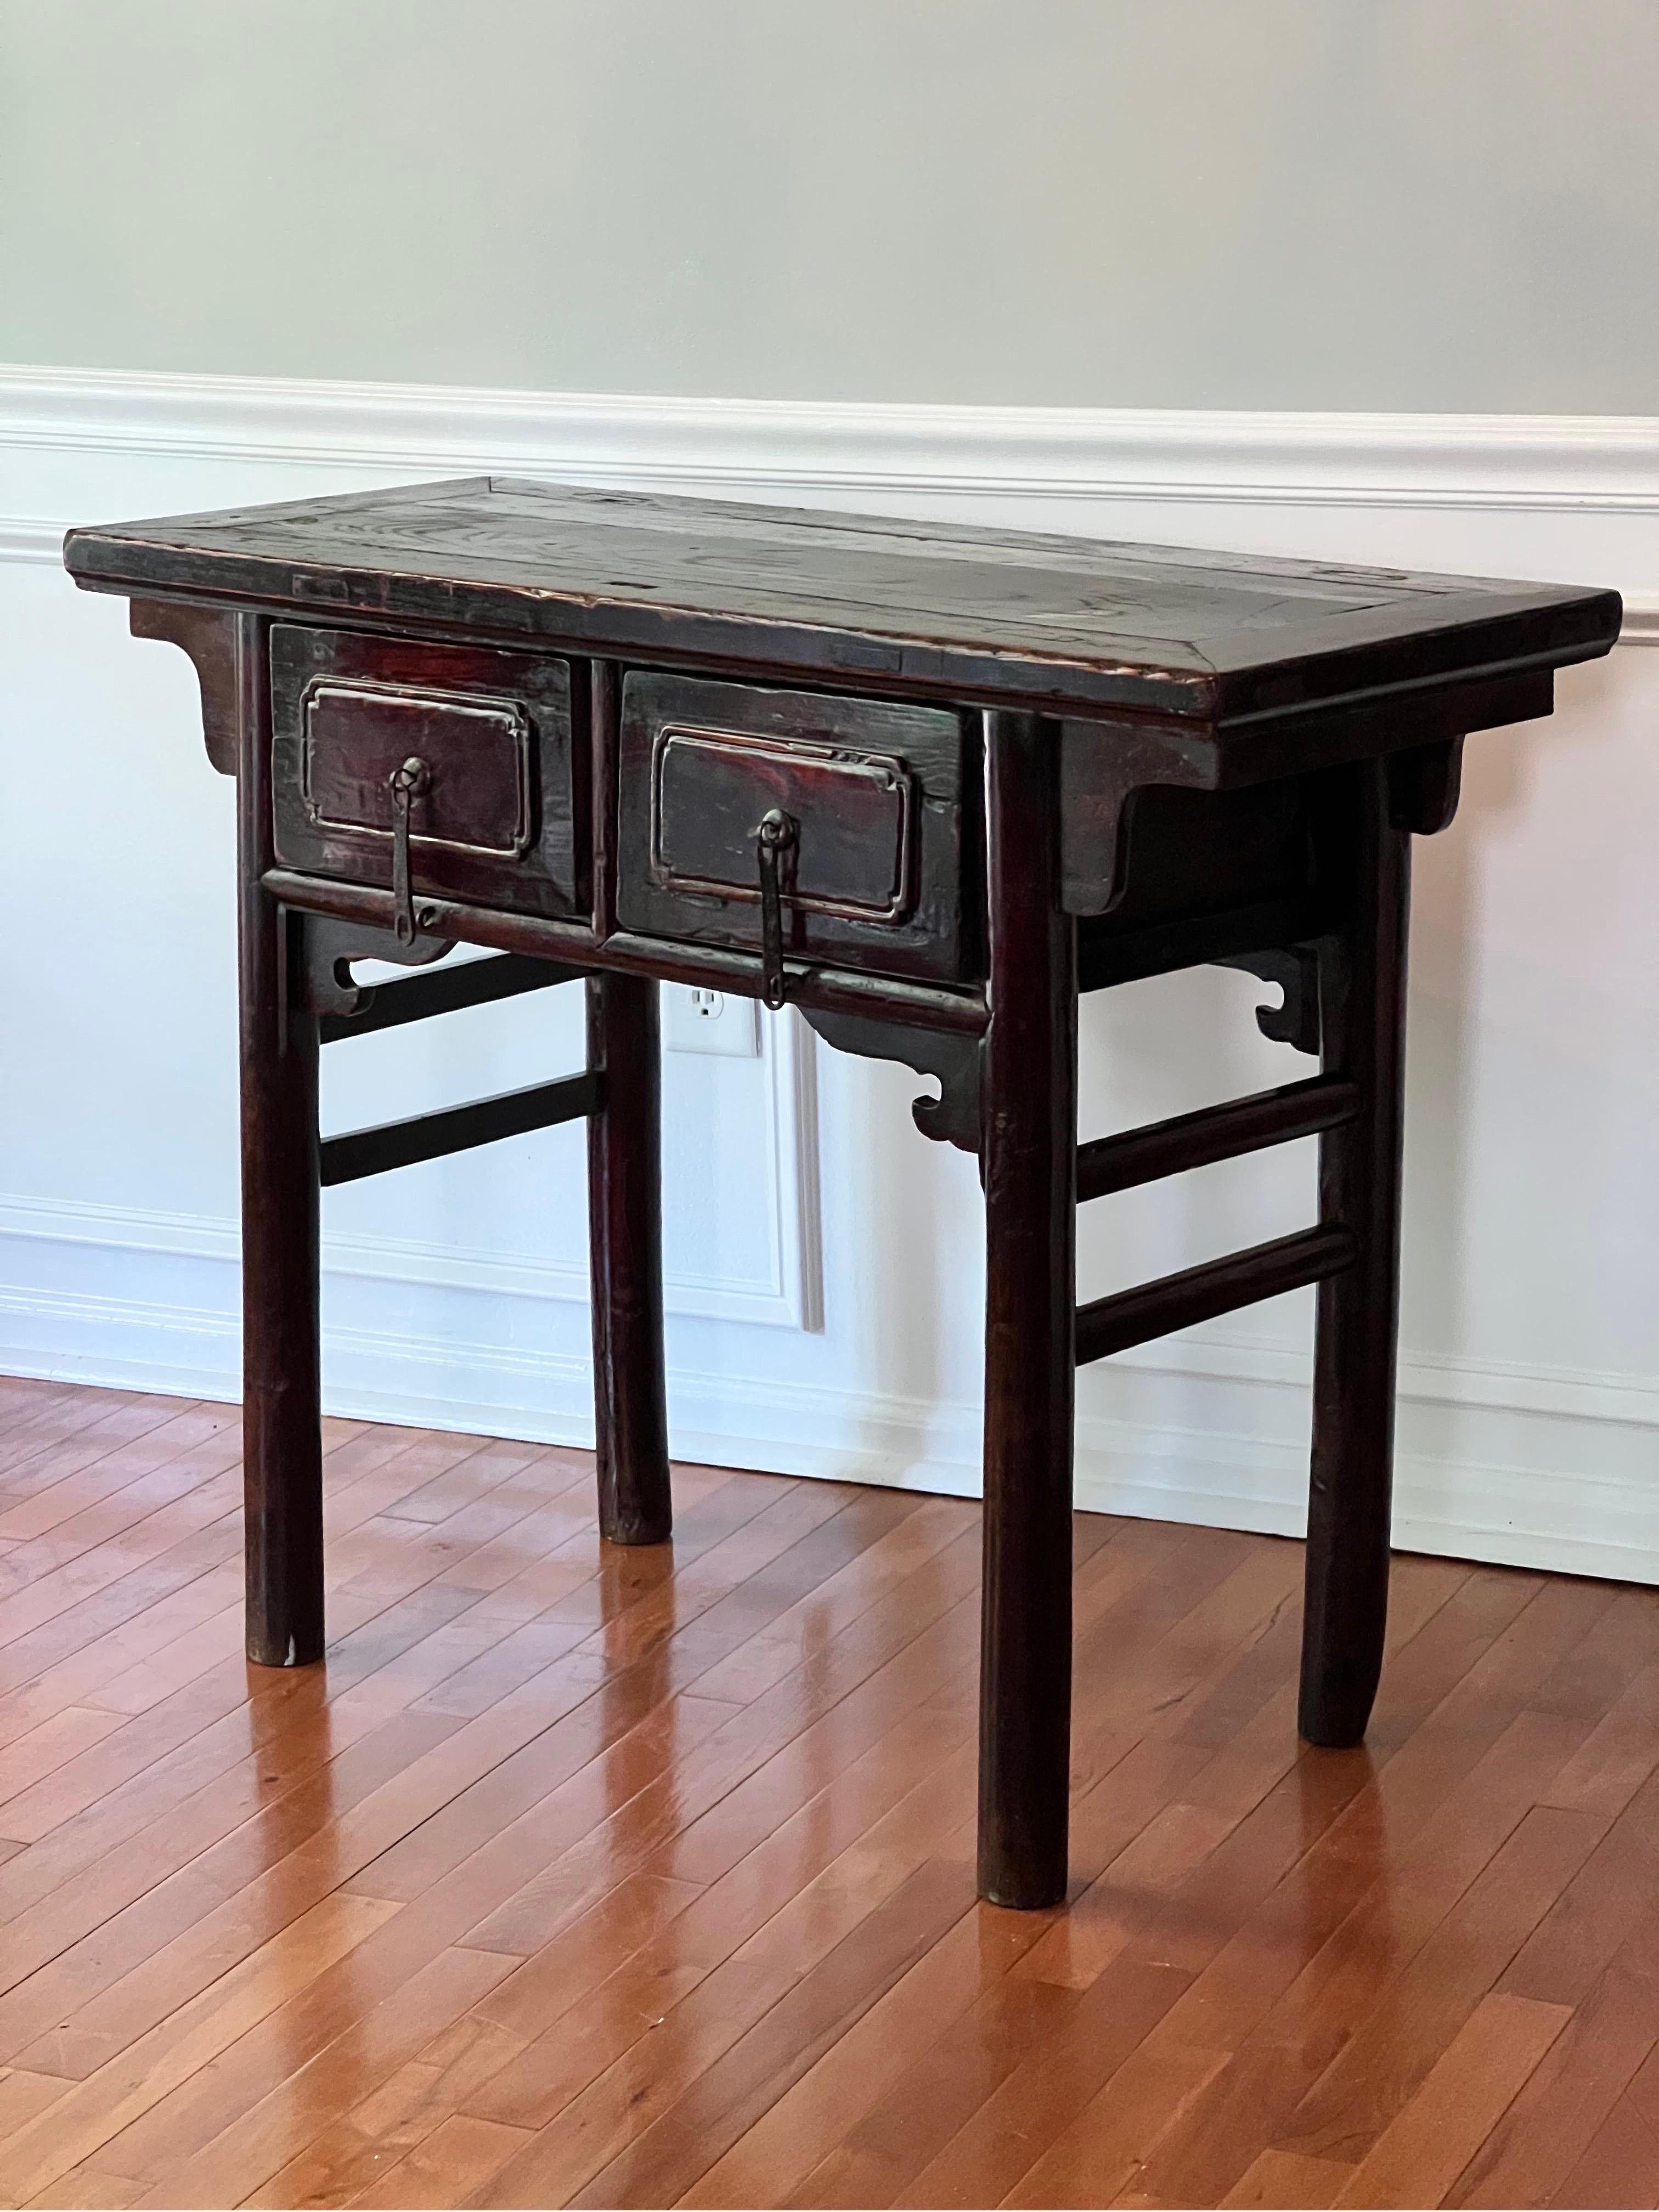 Exquisite antique Chinese lacquered elm Alter table, 19th century.

Richly hued in tones of wine and deep brown with great patina, this lacquered table features two deep drawers with unique, original hammered iron hardware pulls and straight, round